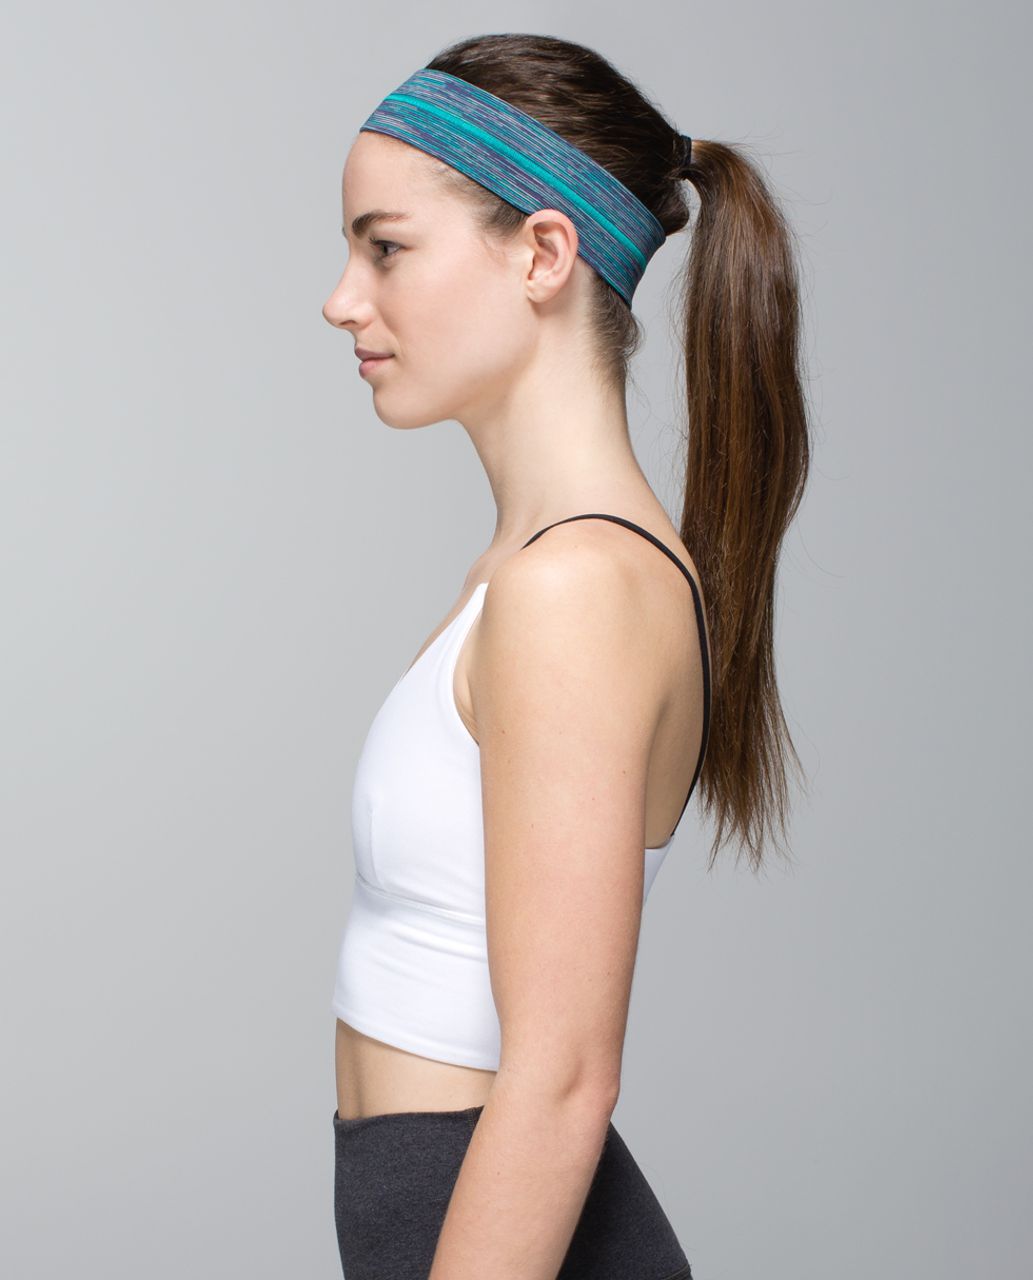 Lululemon Fly Away Tamer Headband - Wee Are From Space Blue Tropics